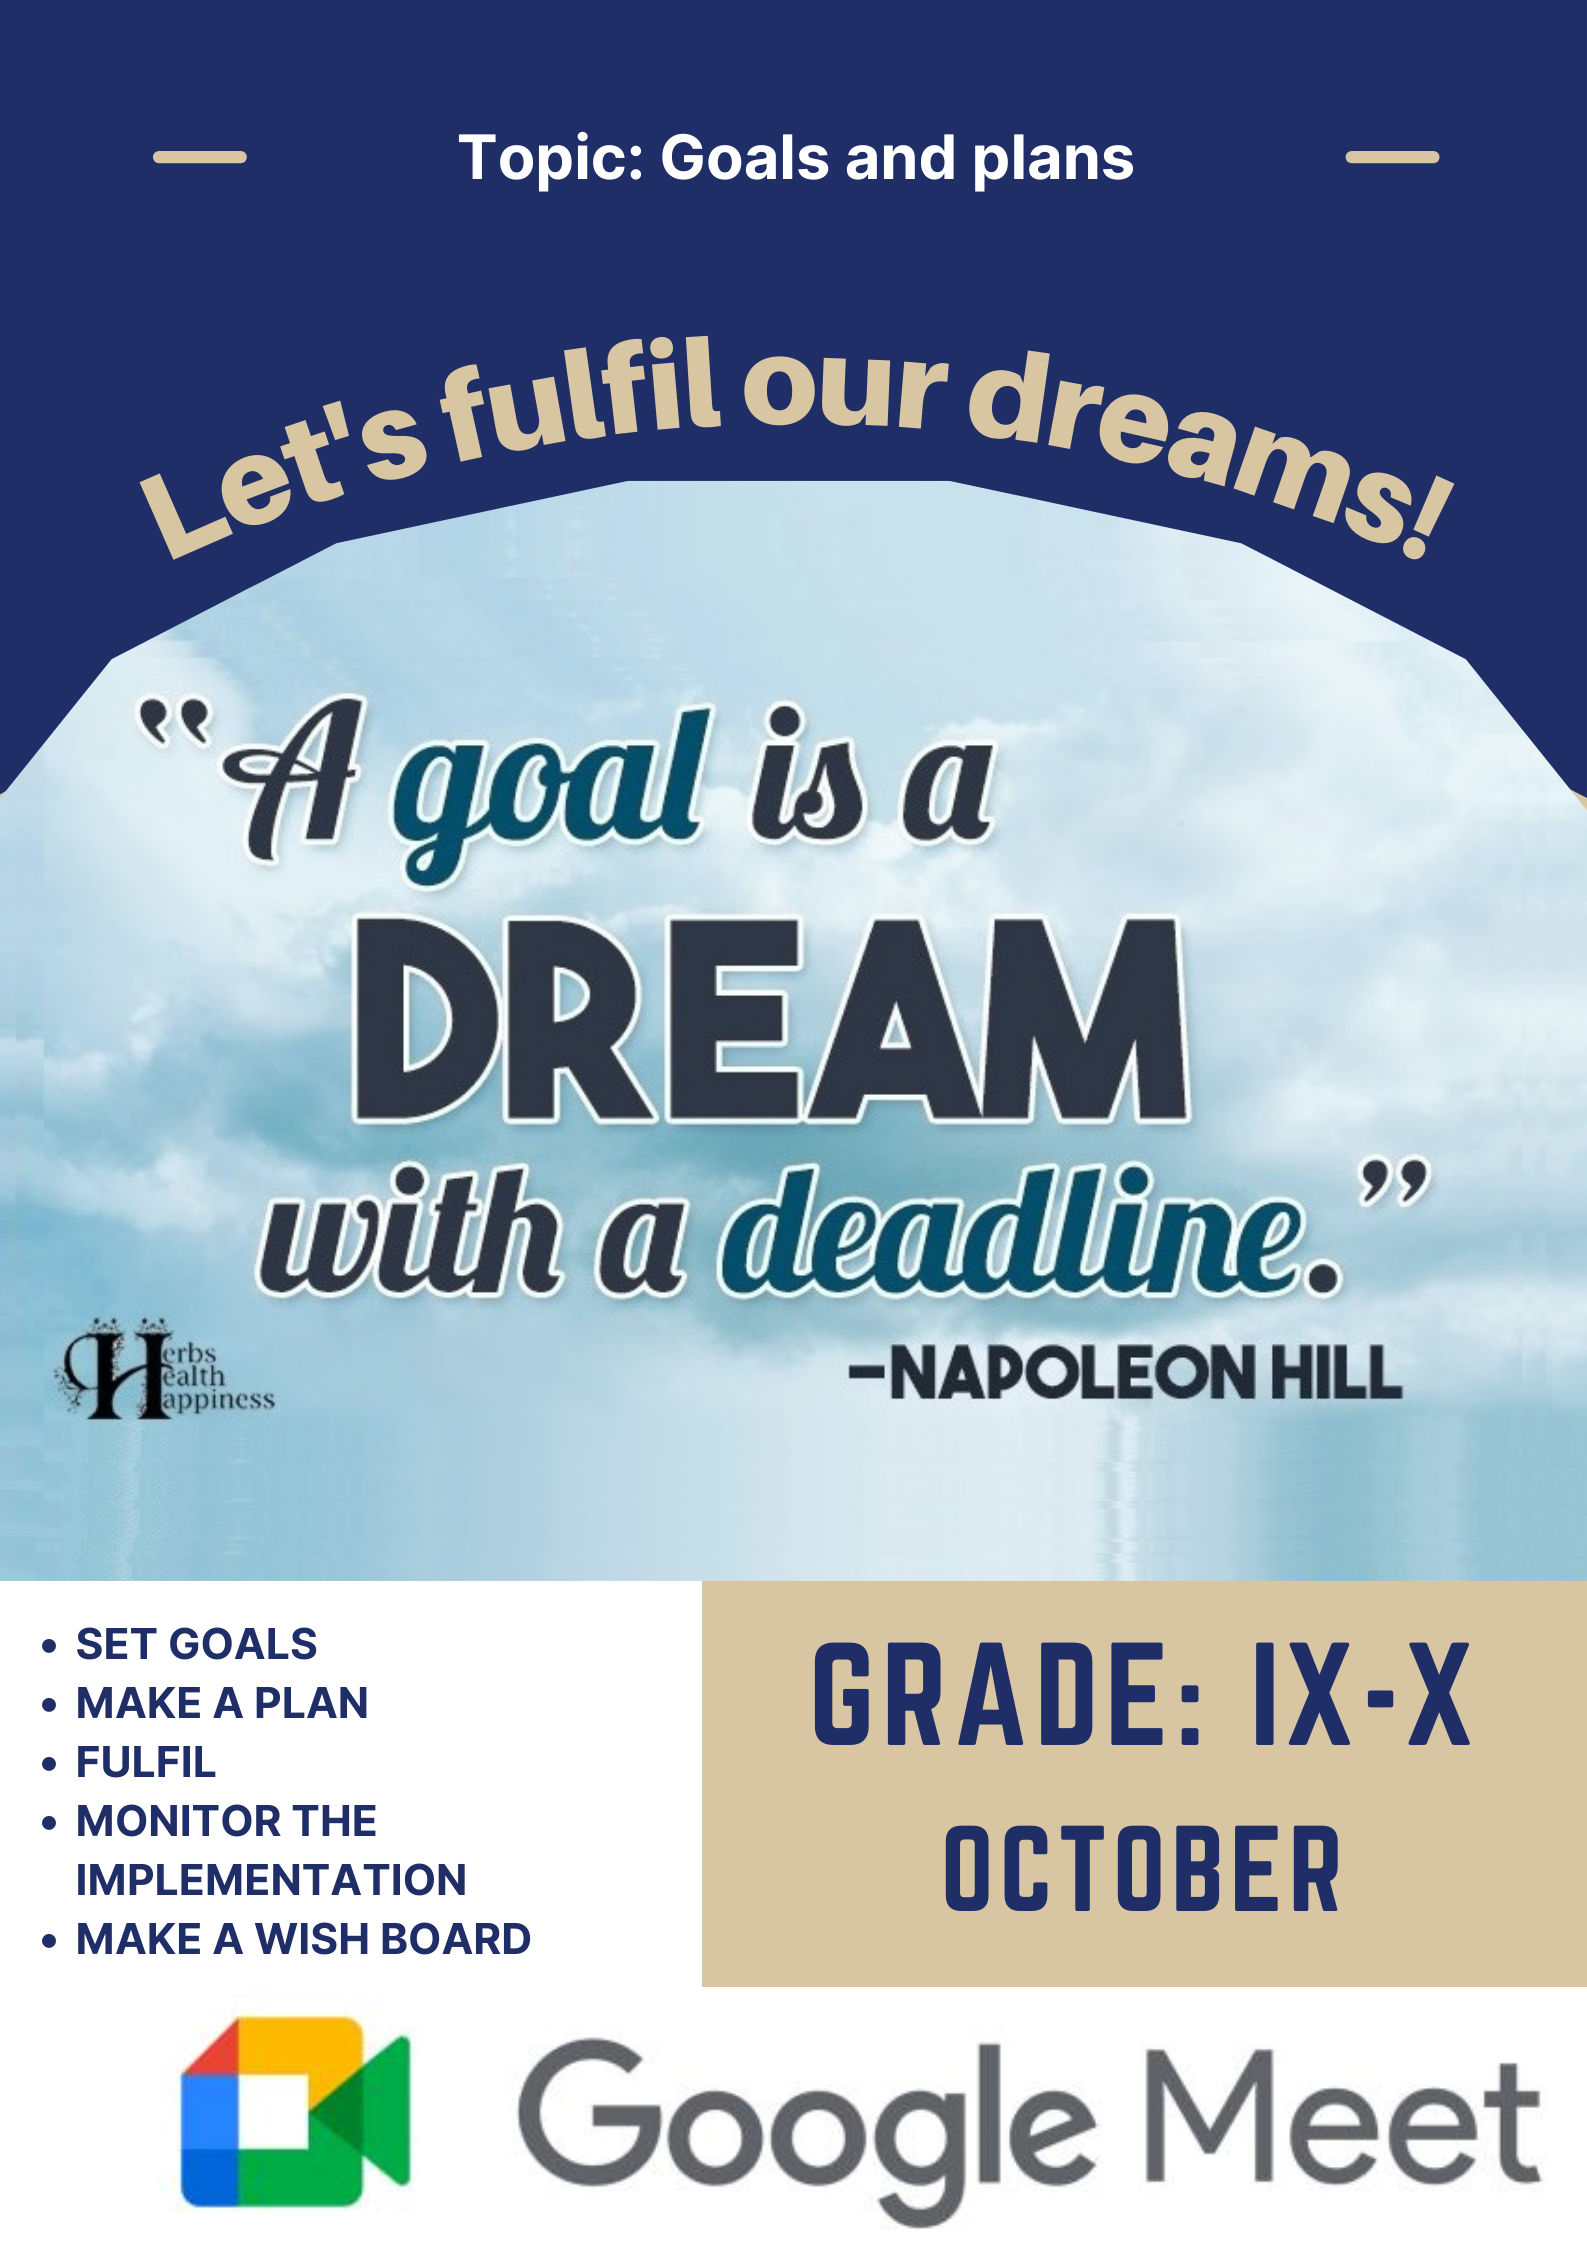 October: Goals and plans